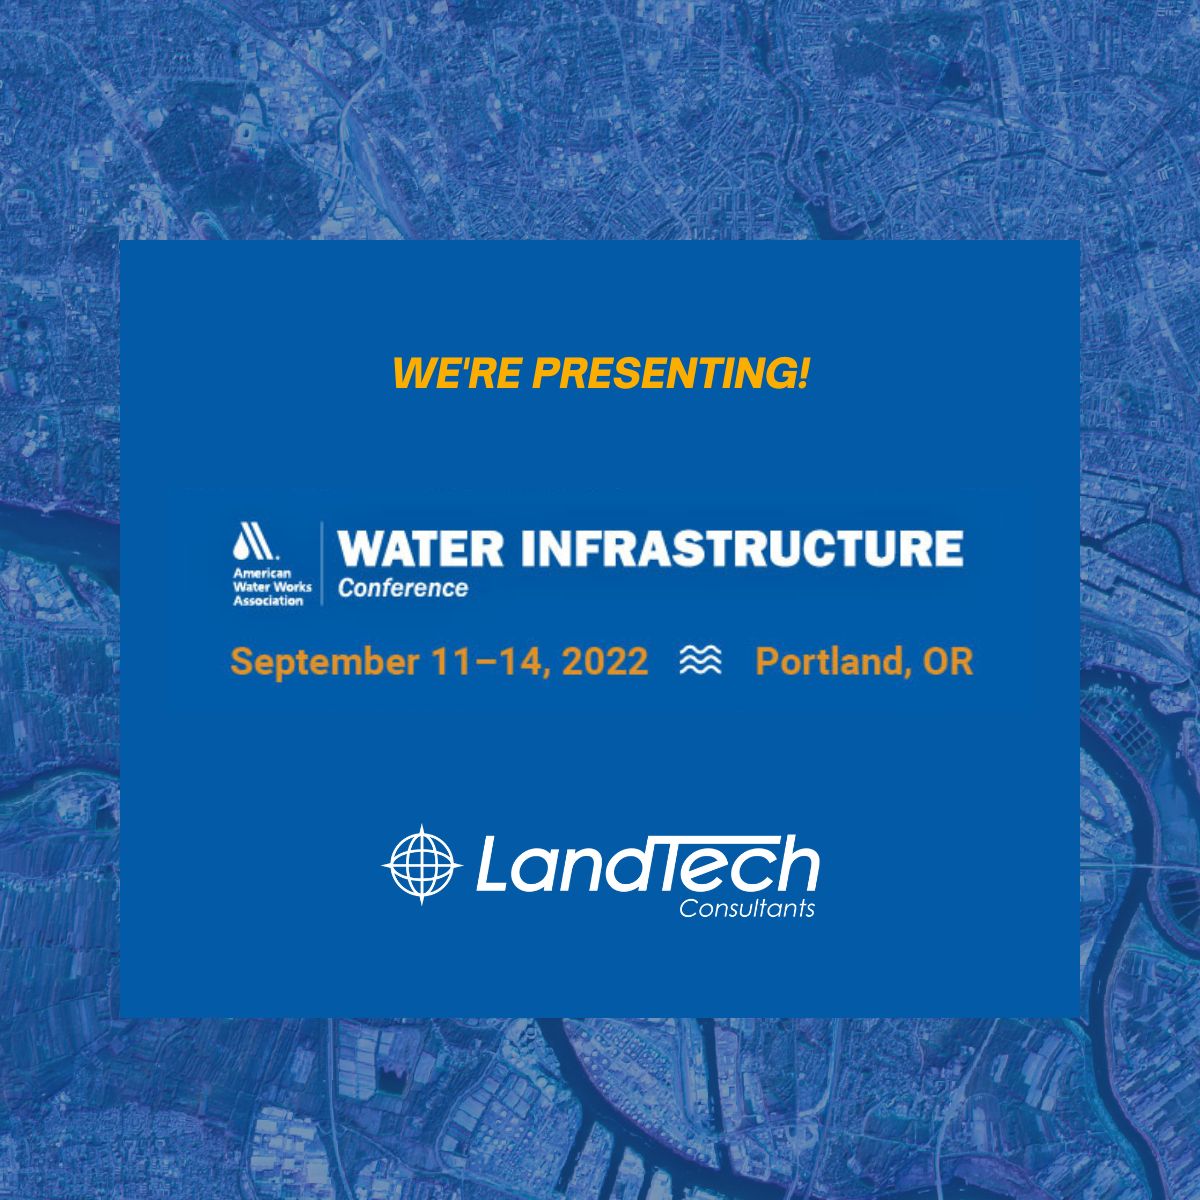 LandTech Presents at AWWA Water Infrastructure Conference LandTech